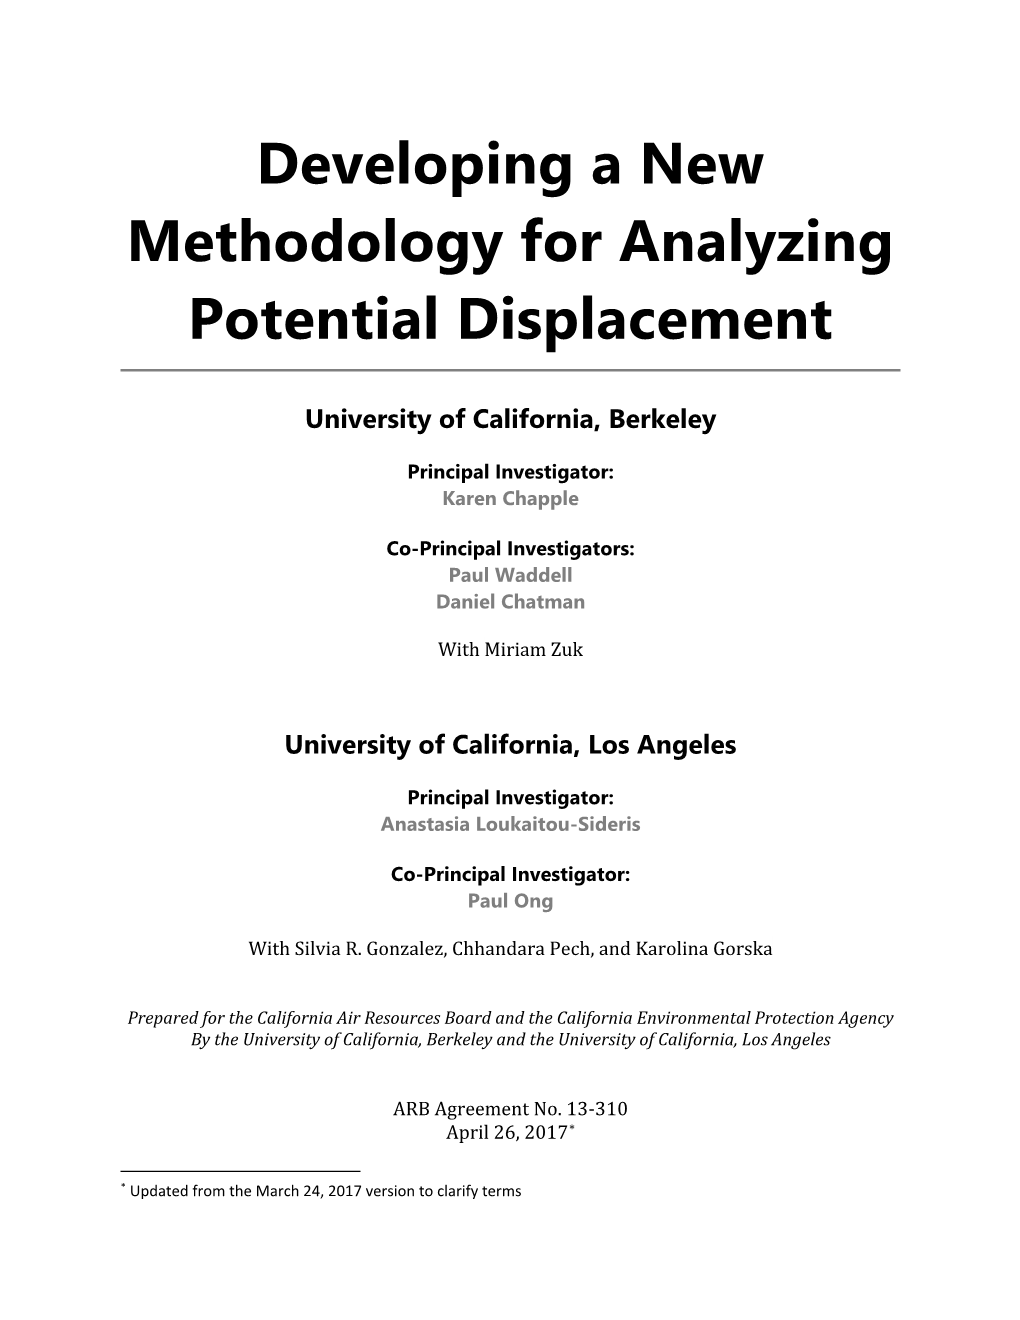 Developing a New Methodology for Analyzing Potential Displacement